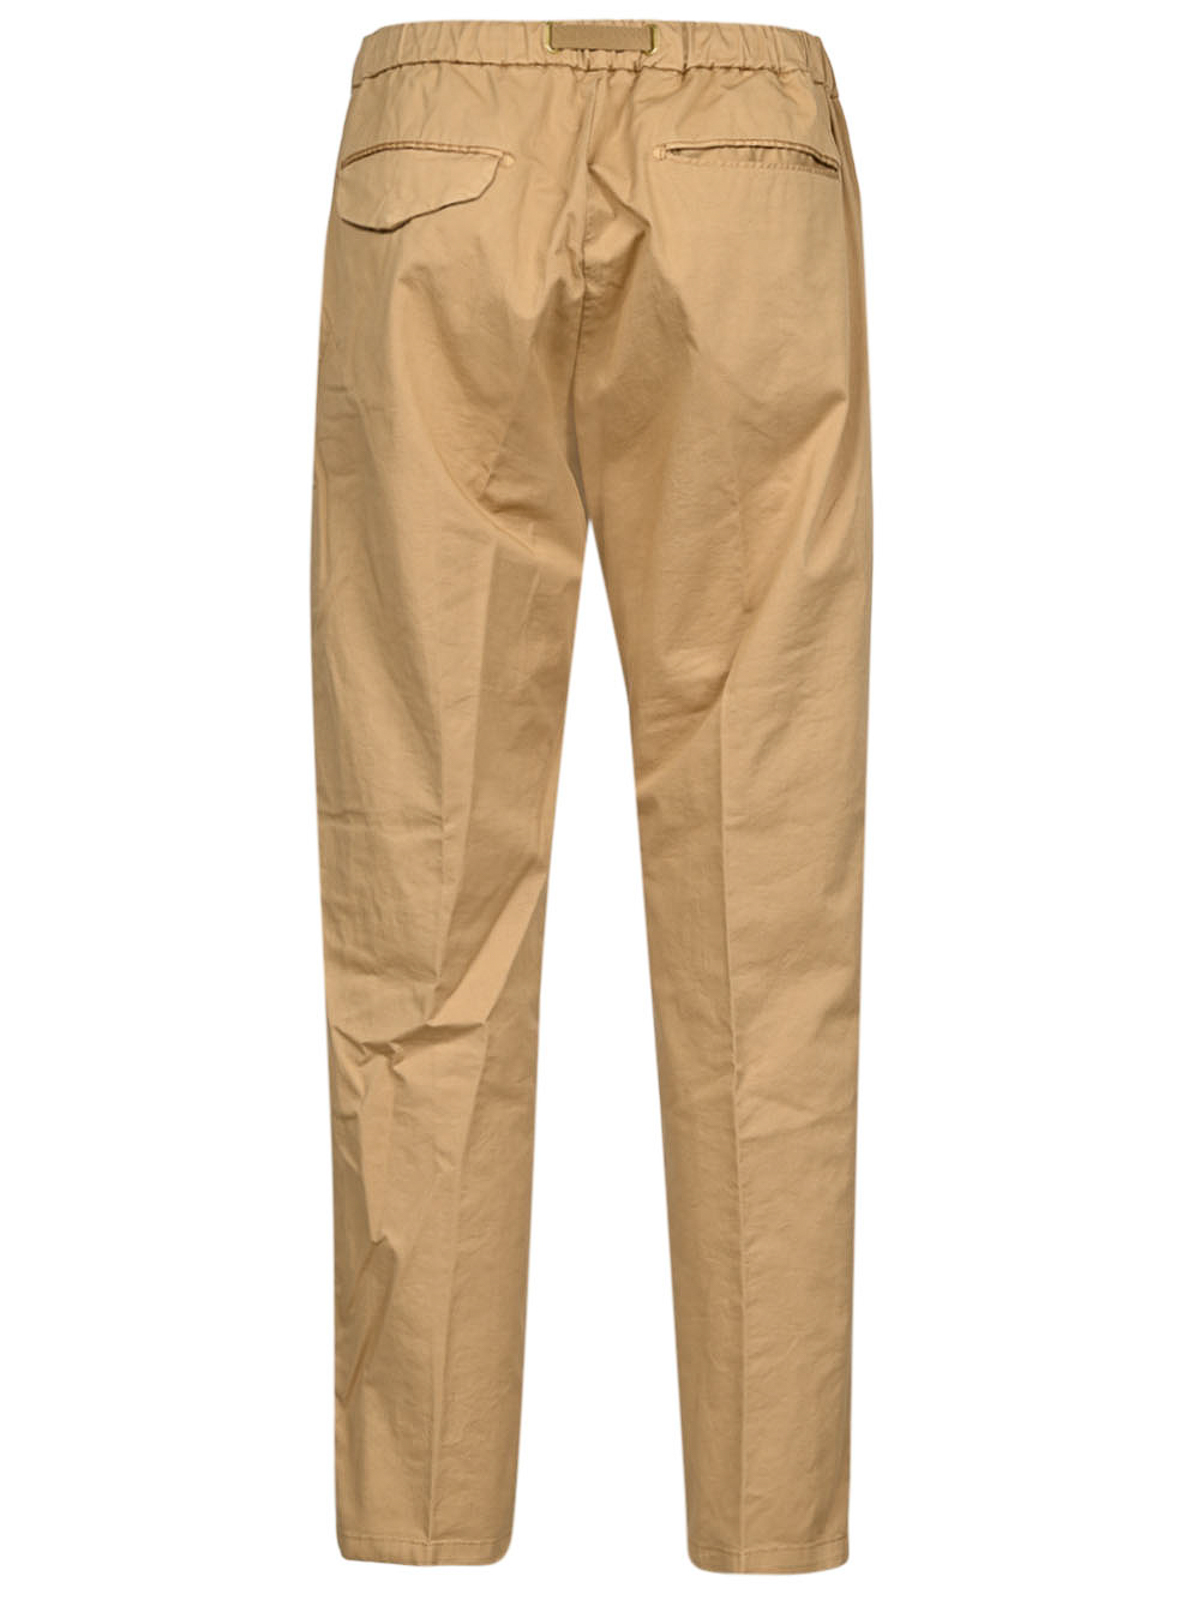 Gas Cotton Trousers - Buy Gas Cotton Trousers online in India